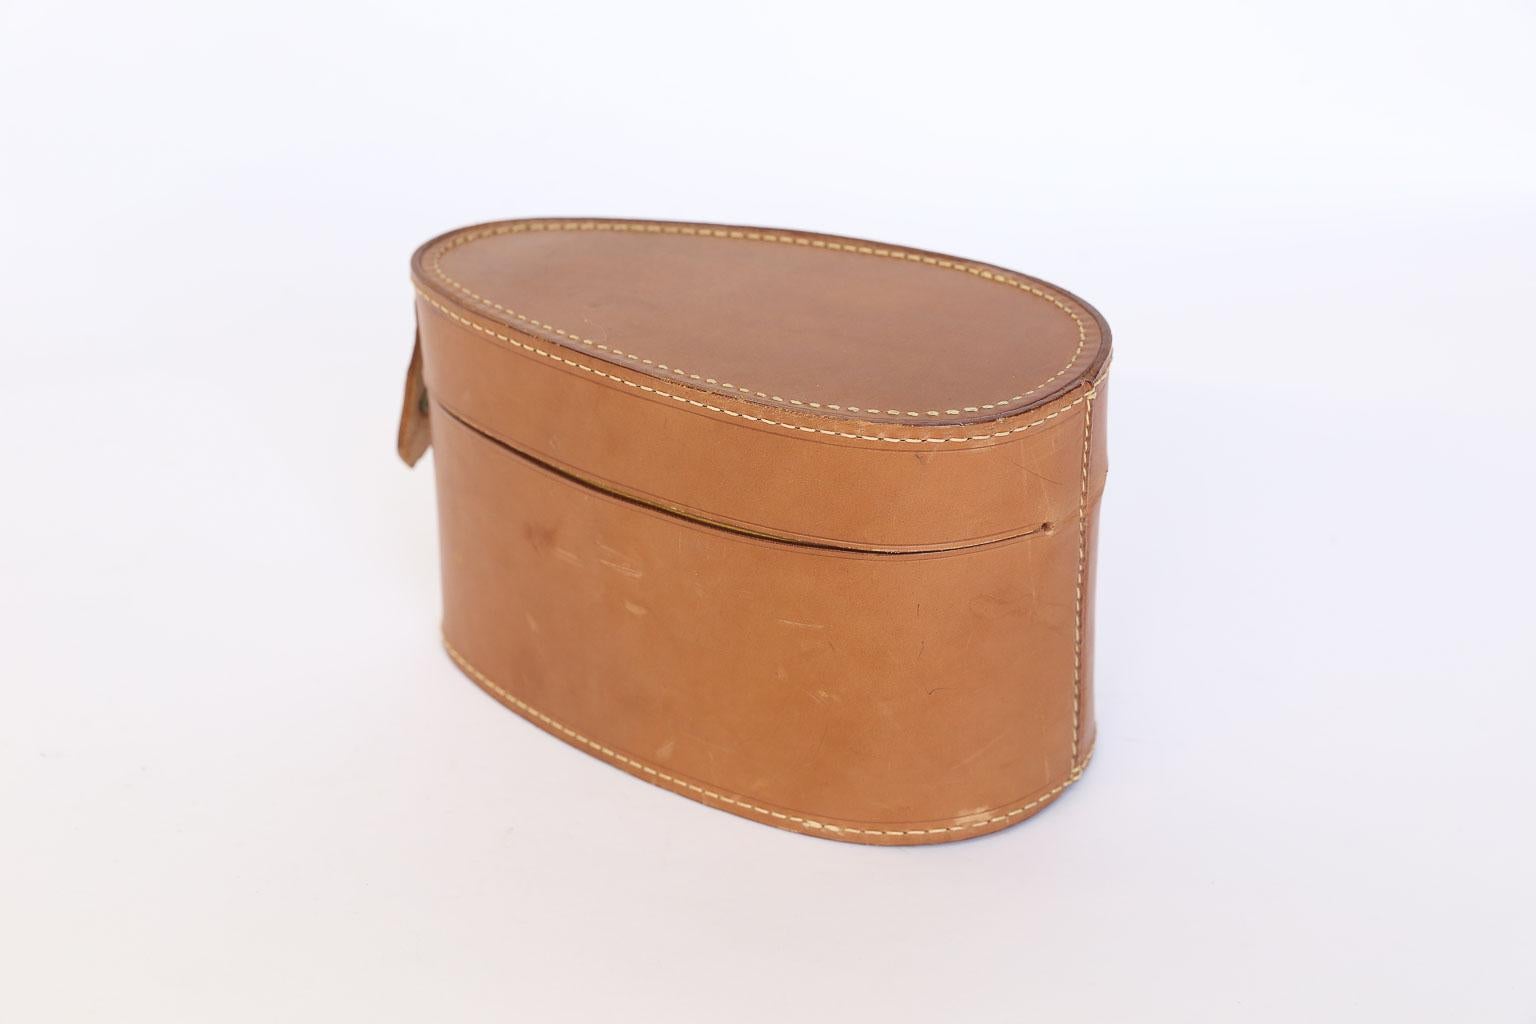 This is a beautiful leather gentleman's collar box. The lovely egg shape of the box makes it a unique accessory for your dresser or bookshelf. The leather and interior are in near perfect condition. The snap closure is missing a small piece so it